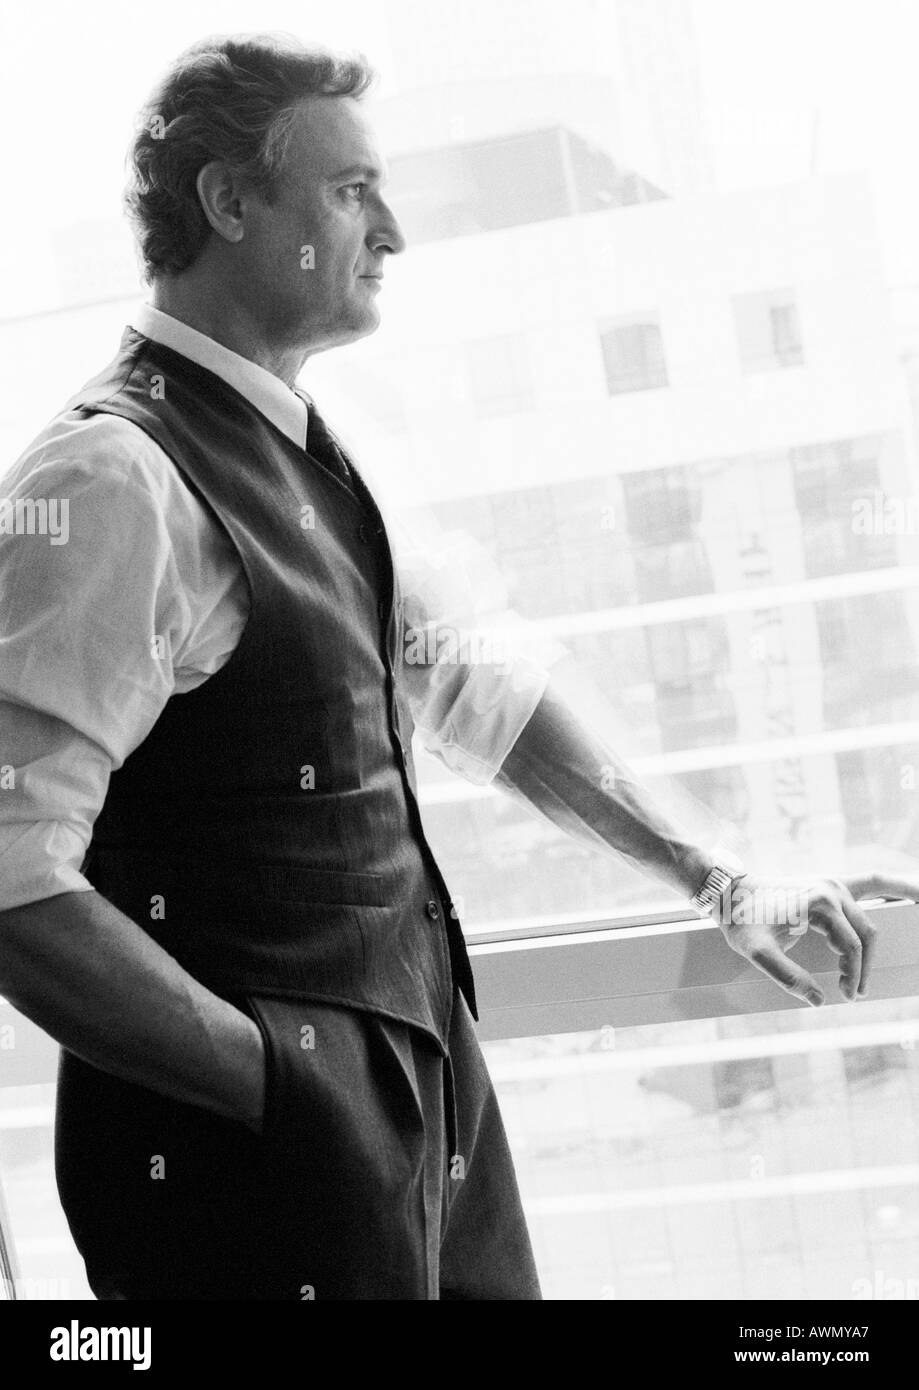 Businessman standing next to window looking out, side view, b&w. Stock Photo